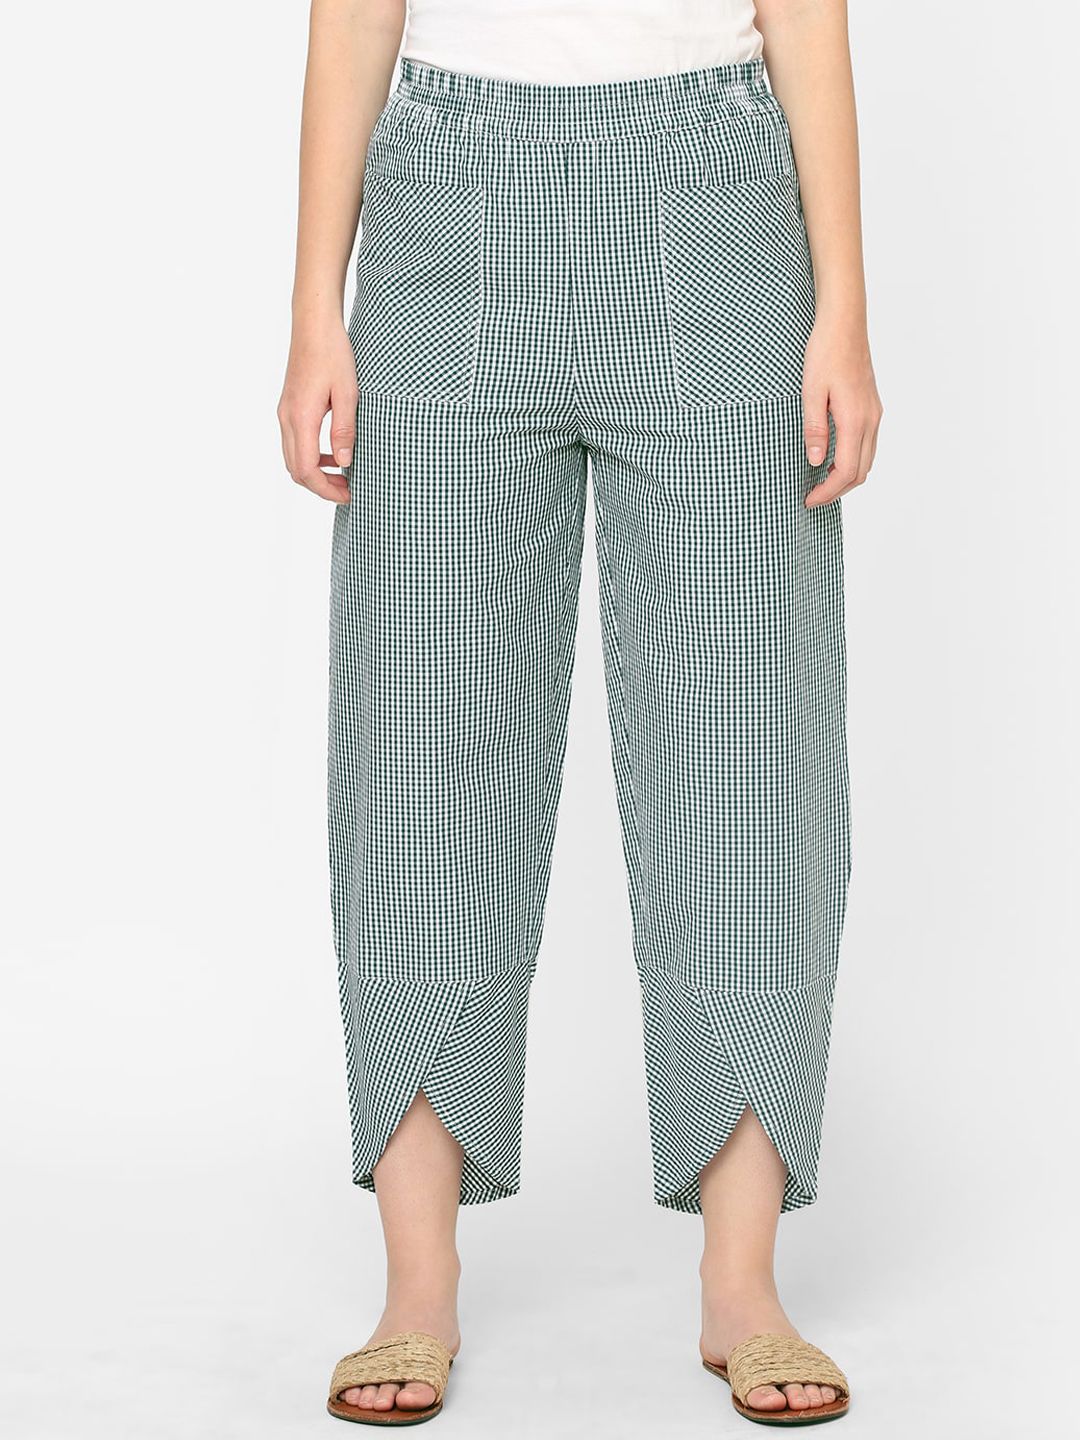 Mystere Paris Women Green Checked Cotton Lounge Pants Price in India